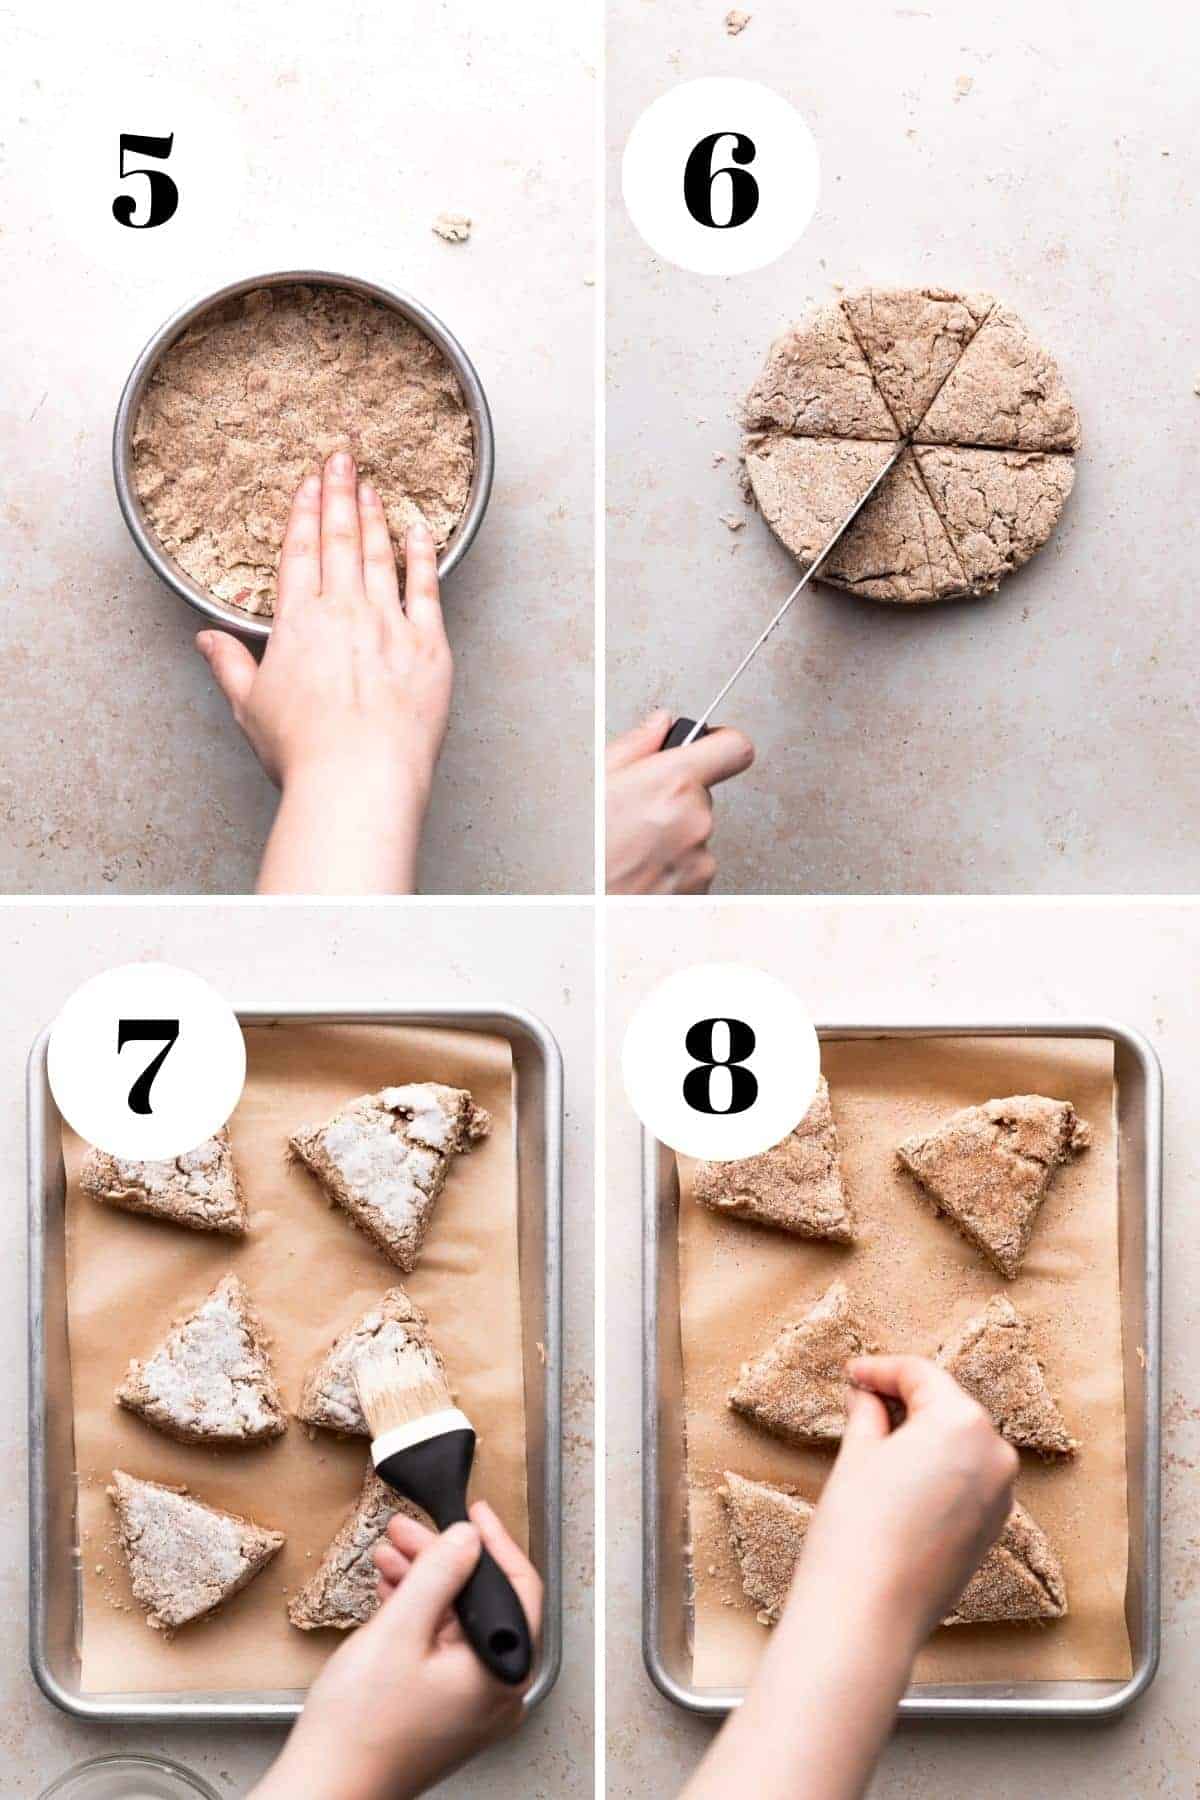 a process collage of the steps for making cinnamon apple scones.